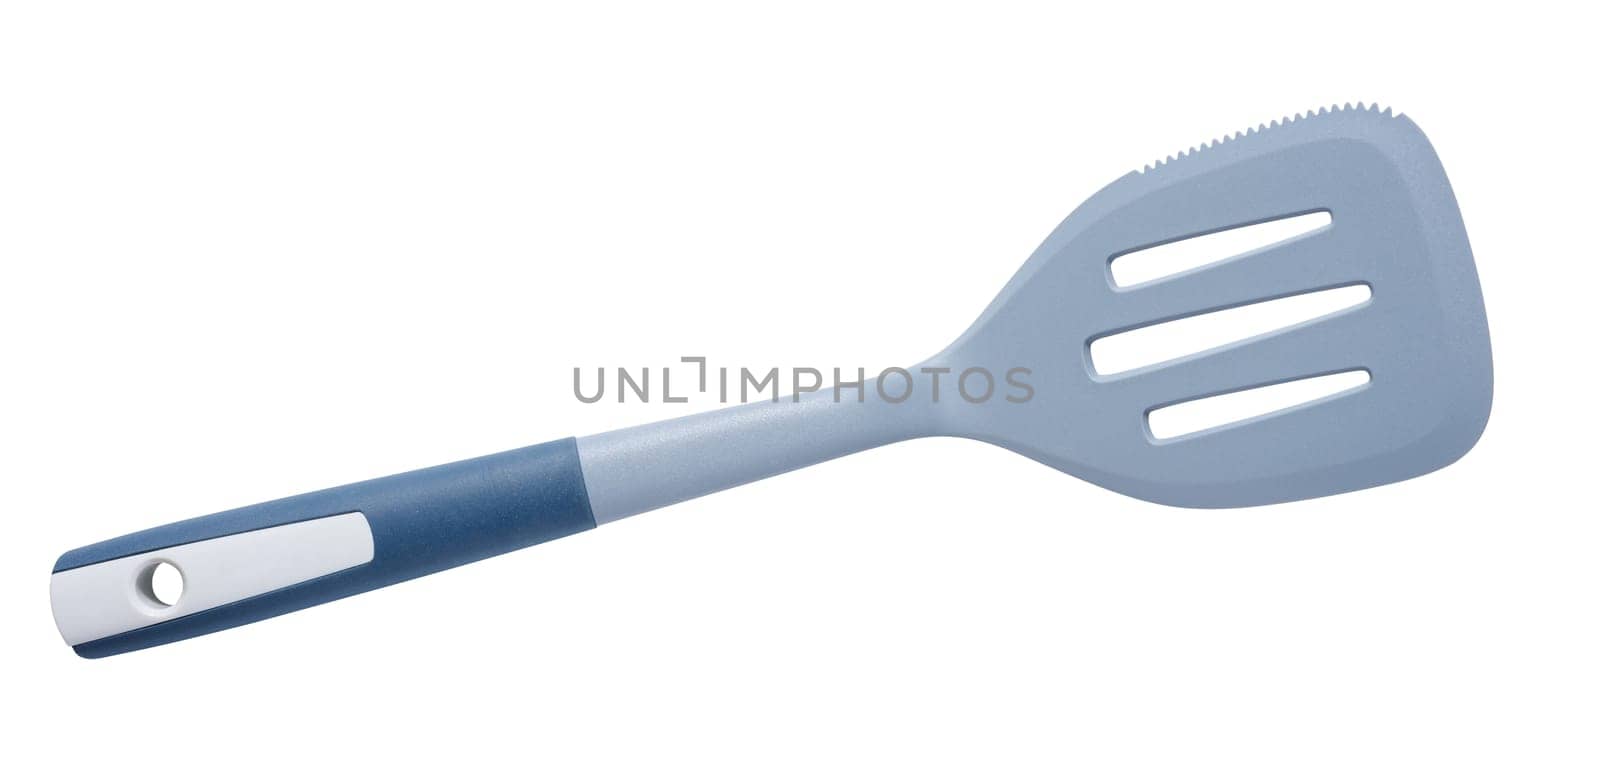 Plastic gray spatula for cooking on a white isolated background, by ndanko